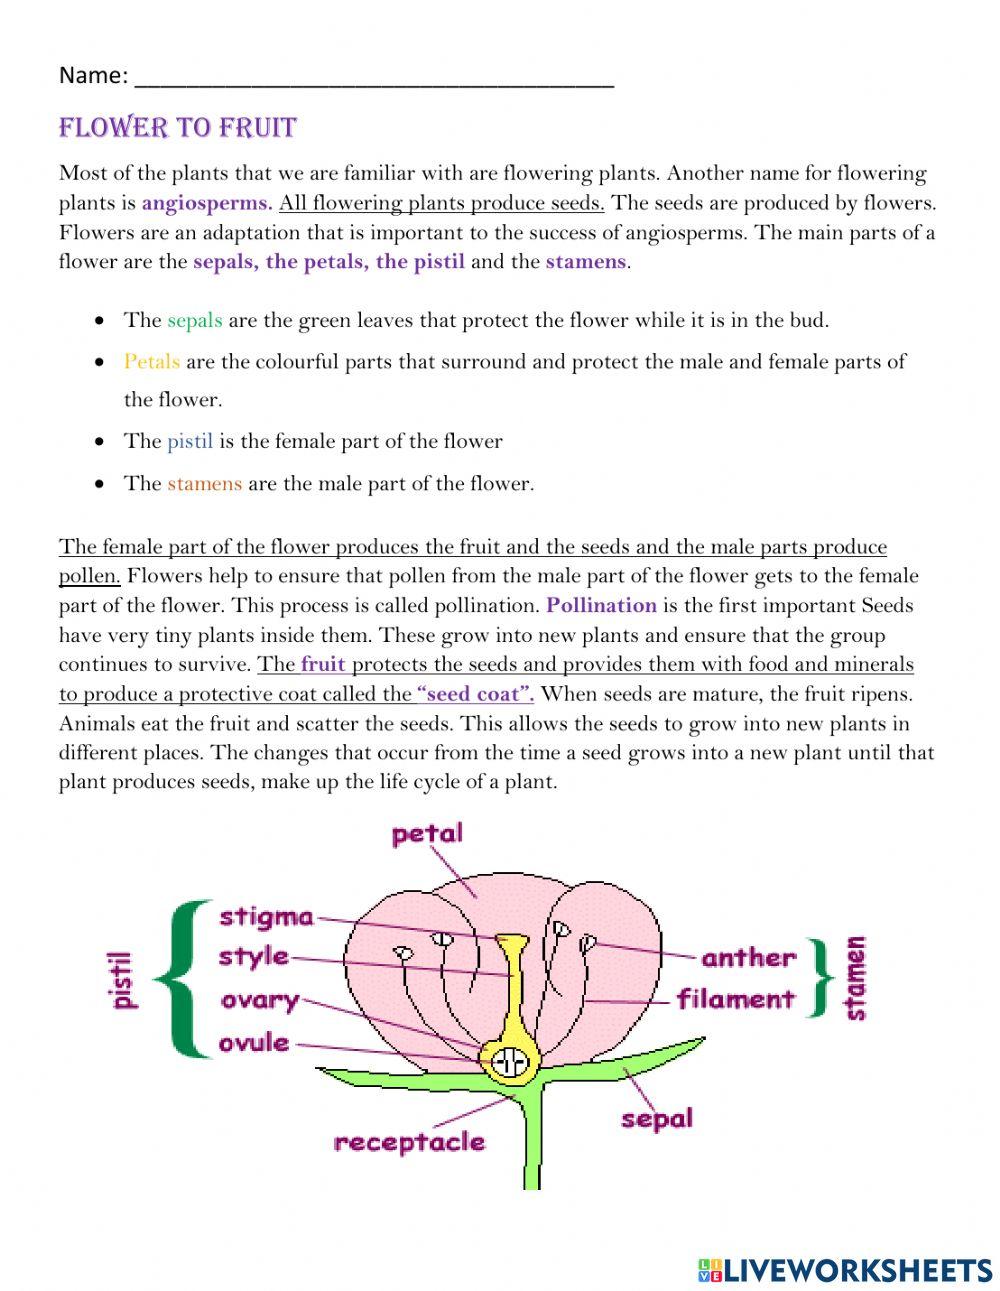 Flower to Fruit Notes